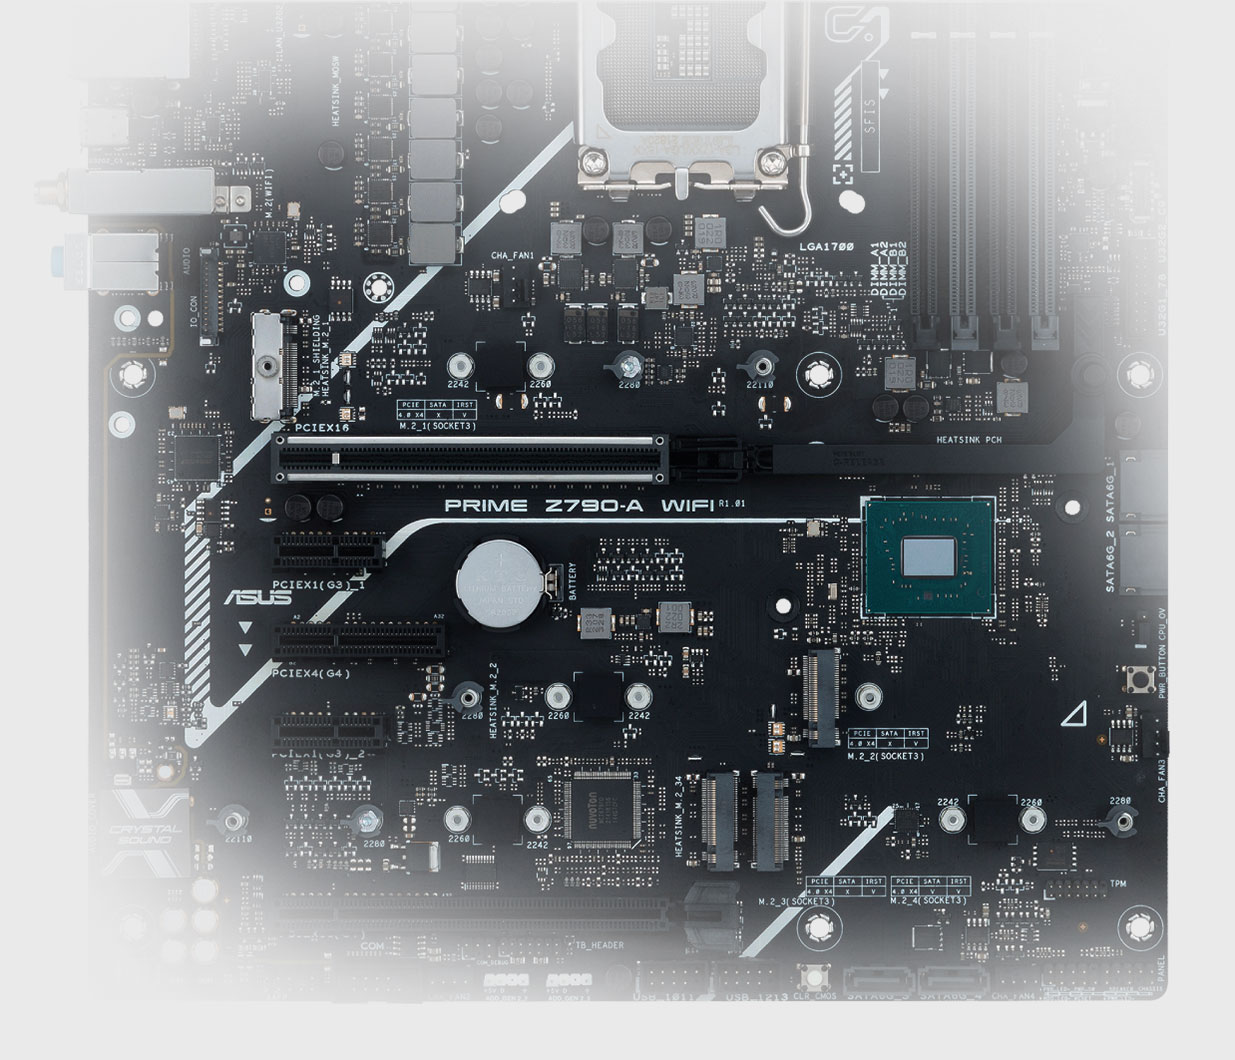 The PRIME Z790-A WIFI motherboard supports four M.2 slots.